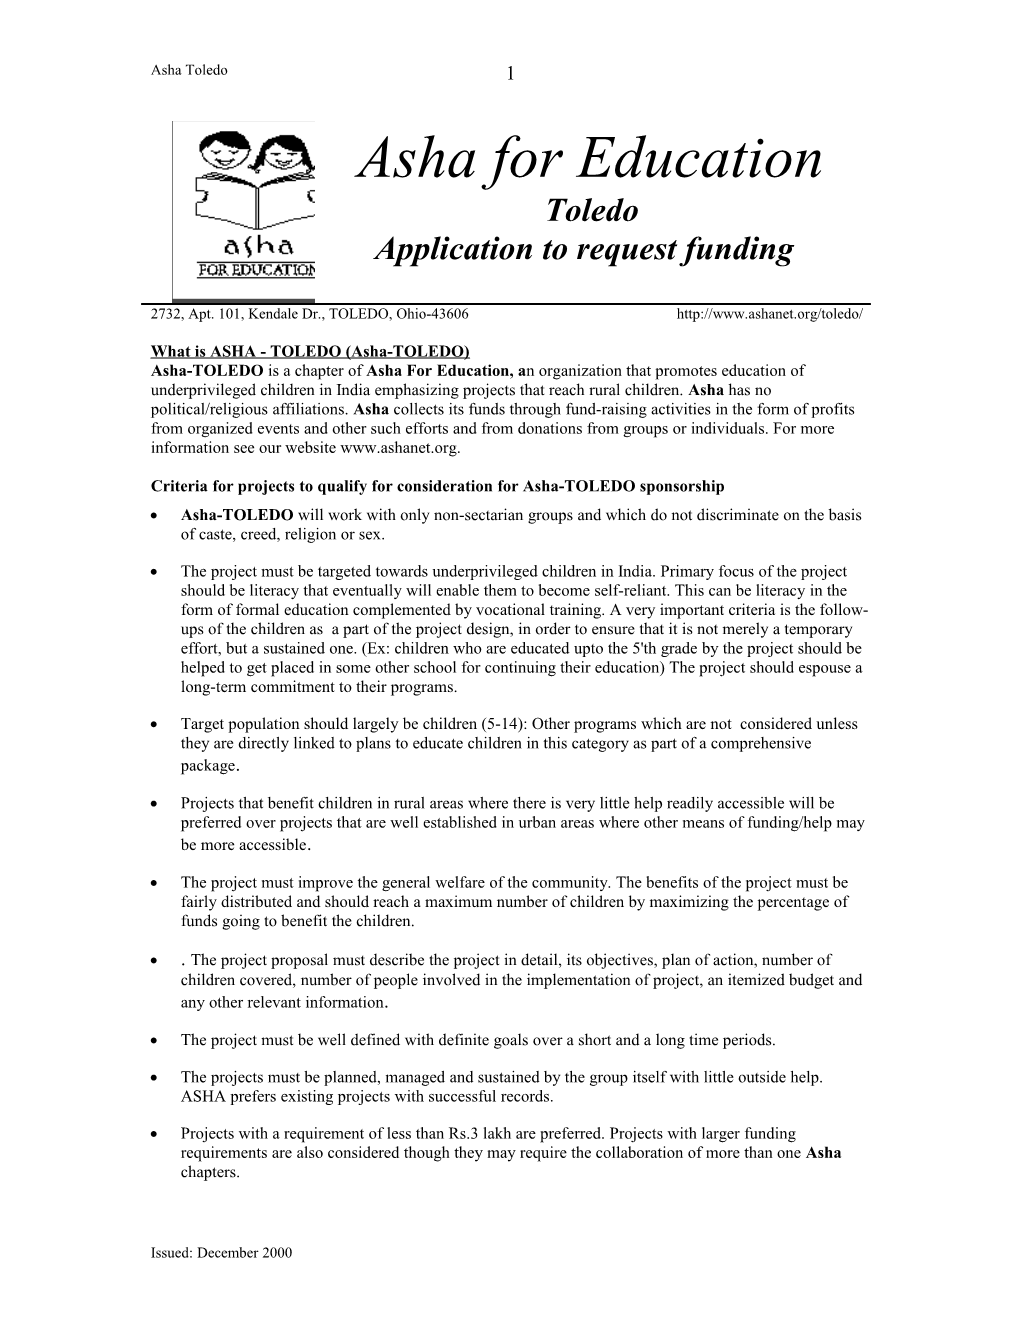 Application Form to Request Funding from ASHA- Arizona s1